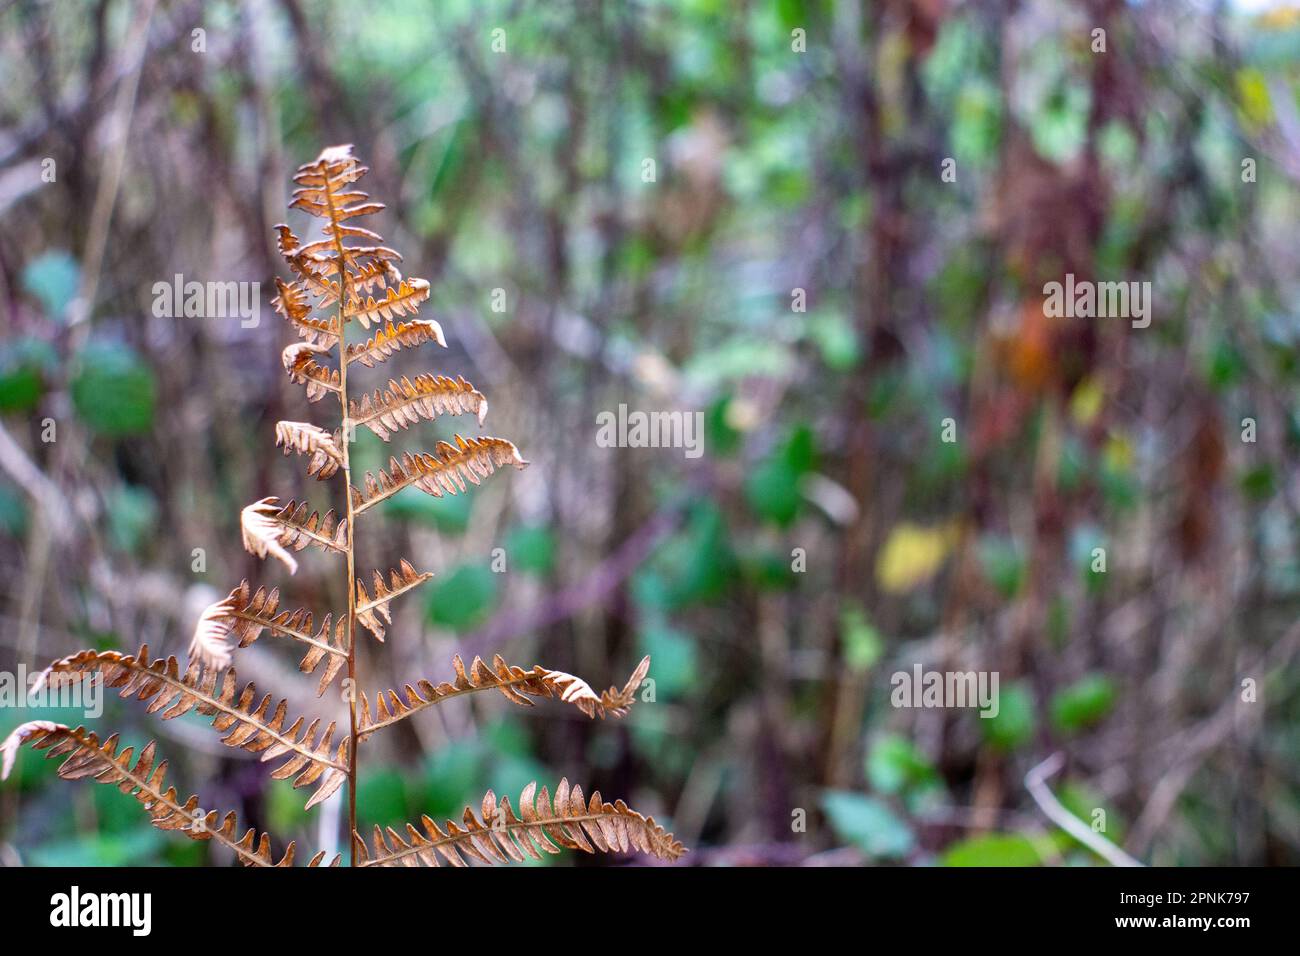 single dried and brown fern leaf isolated on a natural Autumn bramble background Stock Photo